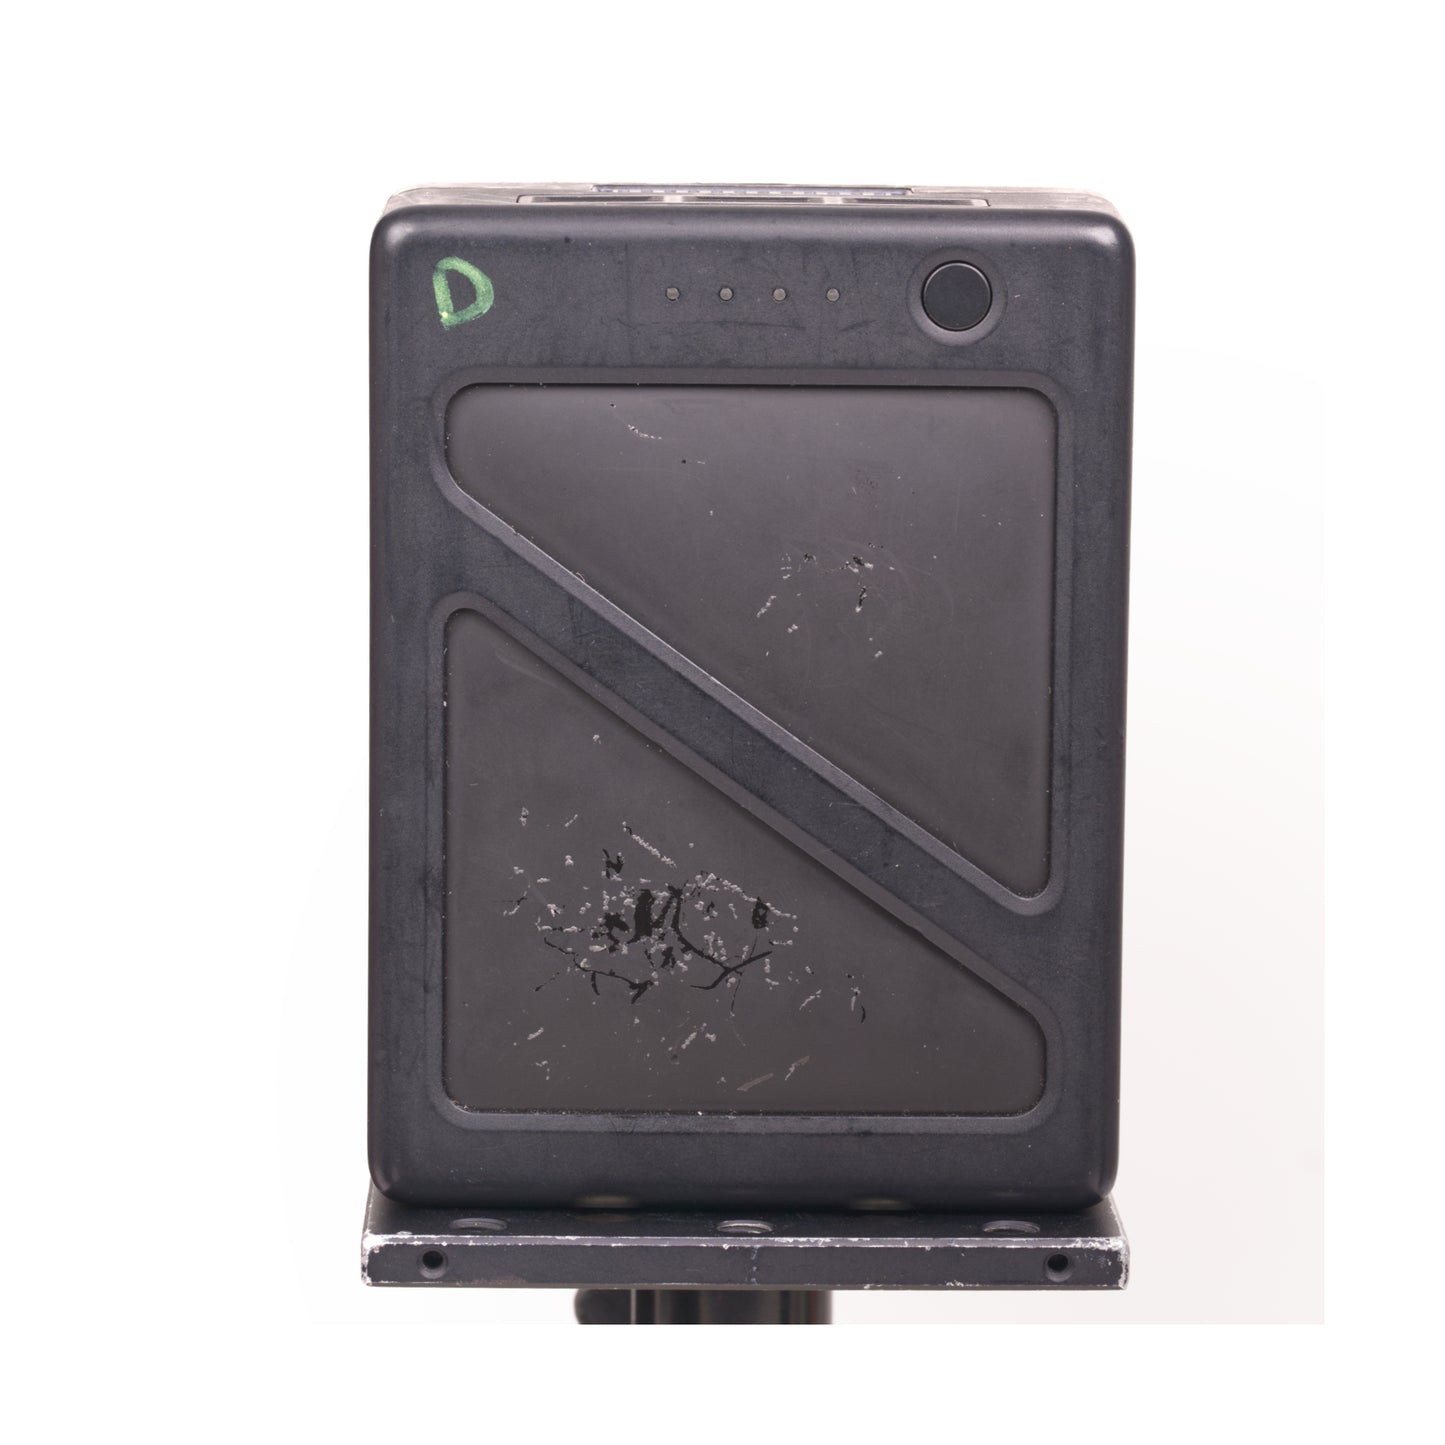 DJI TB50 Ronin 2 lithium ion rechargeable battery - Ex Rental